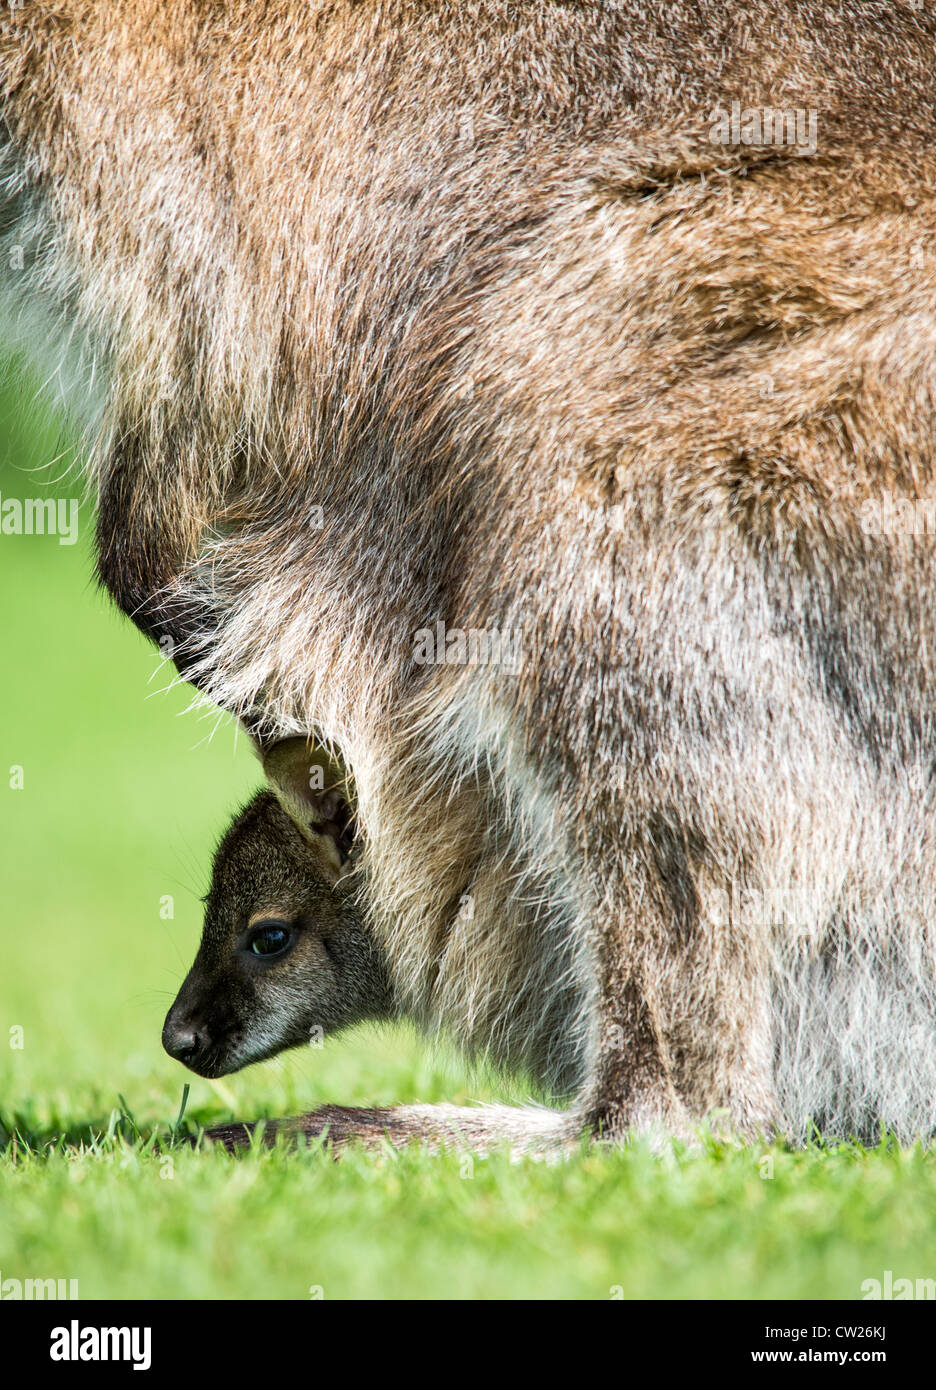 Baby wallaby poking out of mother's pouch Stock Photo